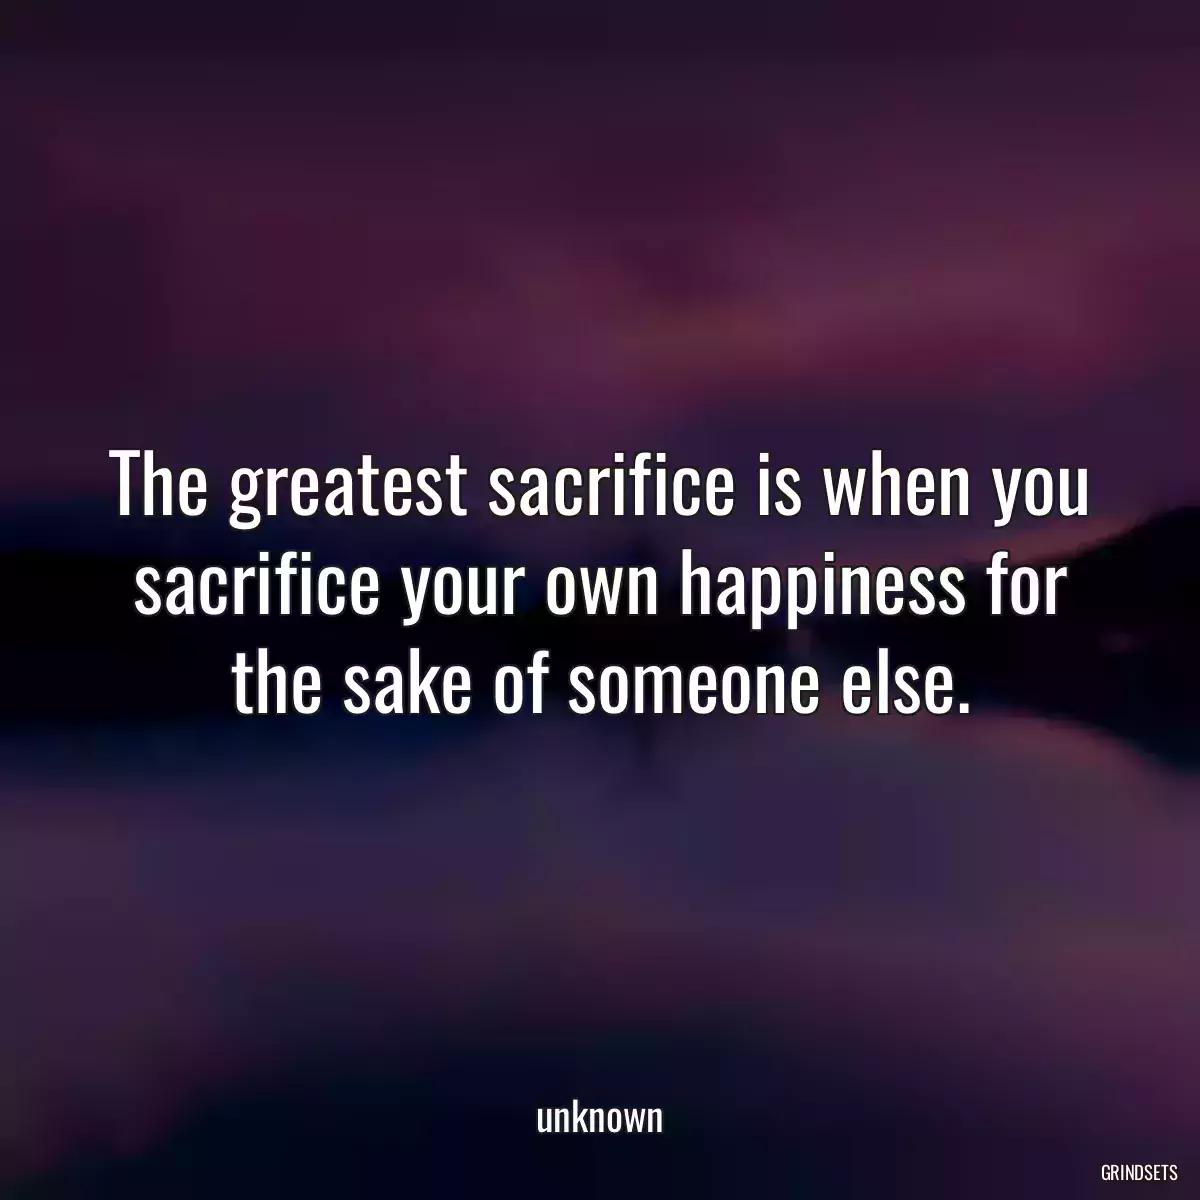 The greatest sacrifice is when you sacrifice your own happiness for the sake of someone else.